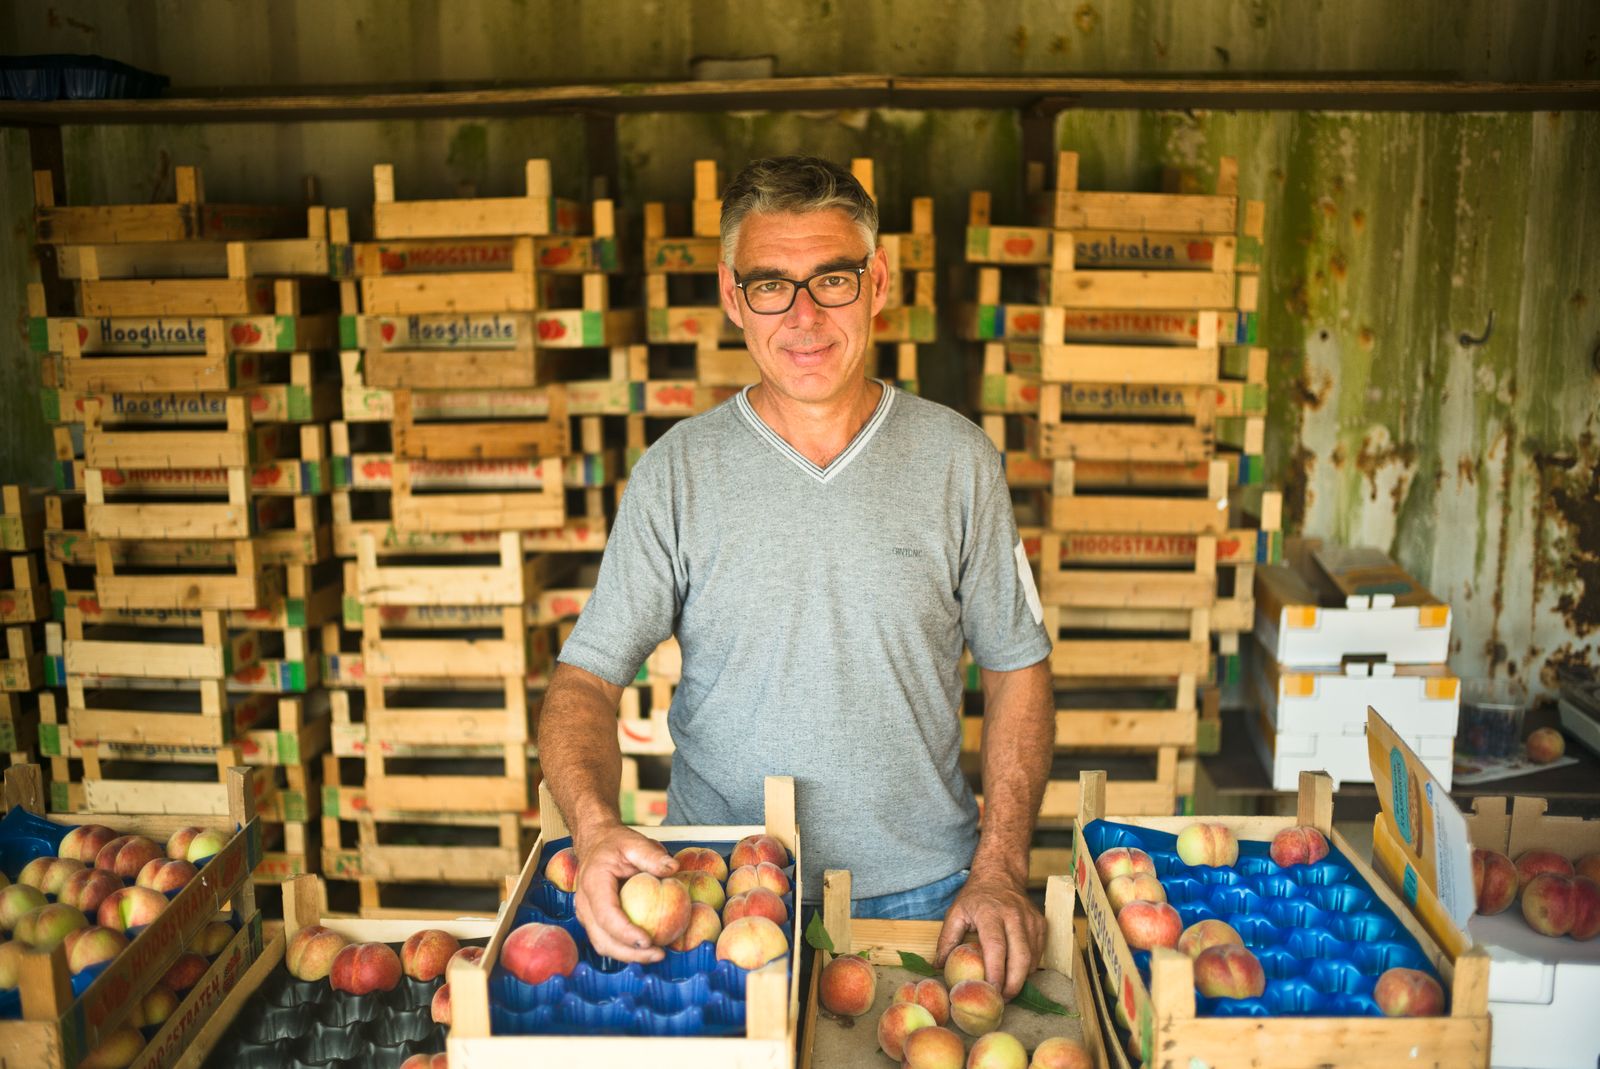 Ludo Rosseels picks peaches every morning and sells them right away in his peach stall.